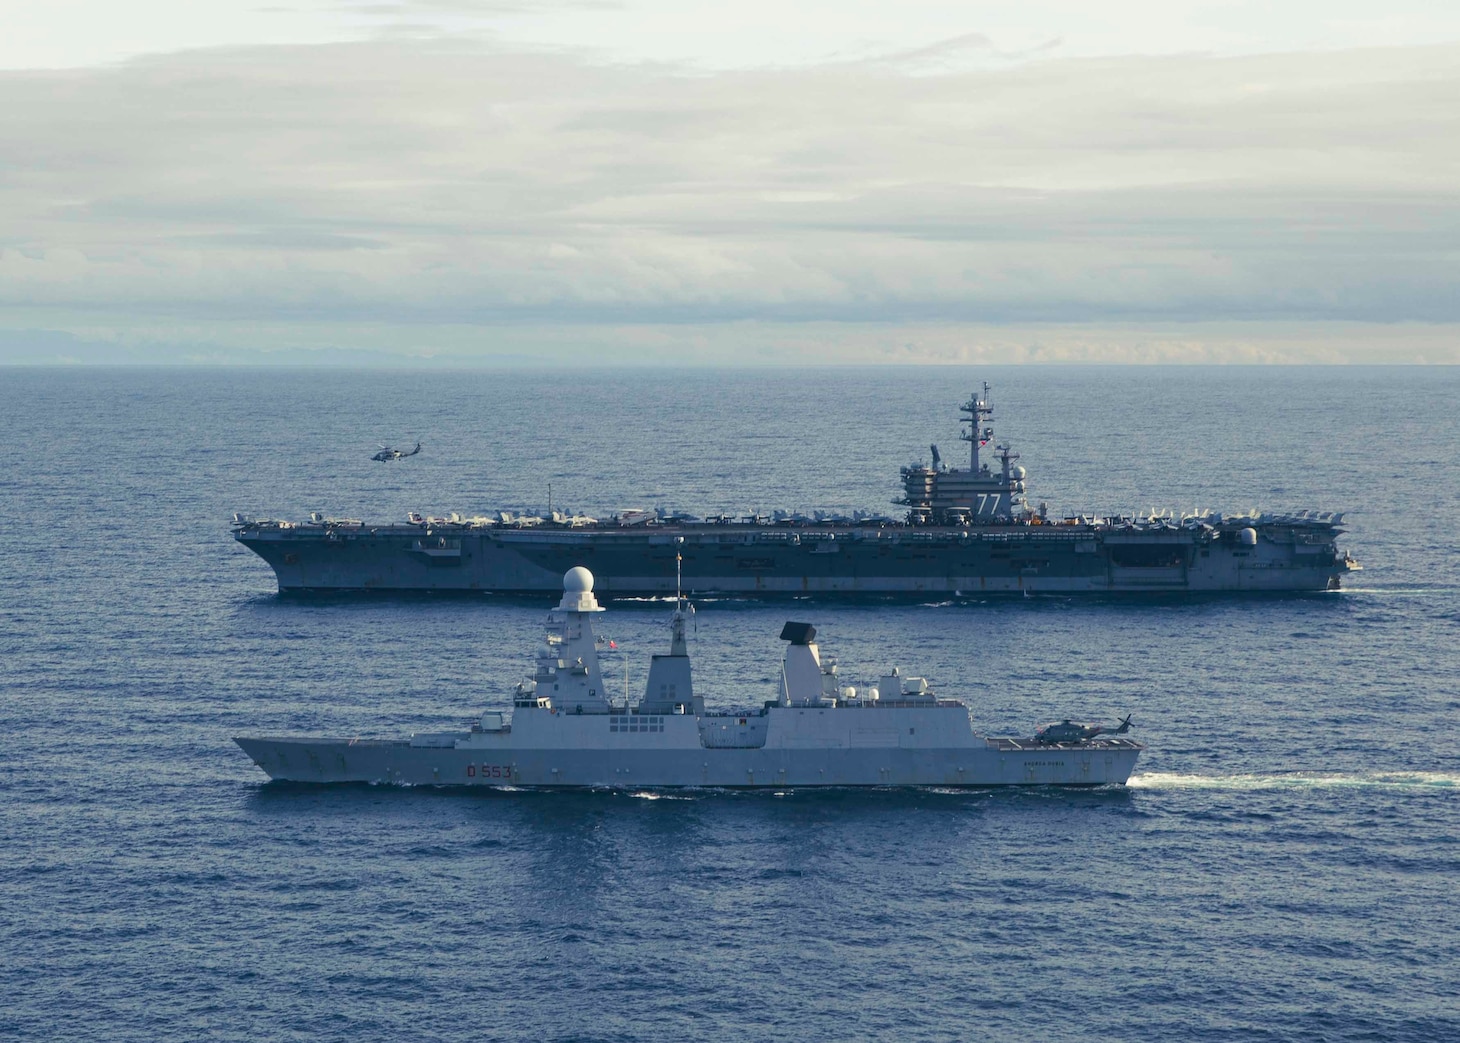 The Nimitz-class aircraft carrier USS George H.W. Bush (CVN 77) sails alongside the Italian Navy Andrea Doria-class air defense destroyer ITS Andrea Doria (D 553) while an MH-60R Knighthawk, assigned to Carrier Air Wing (CVW) 7, takes off during combined operations in the Adriatic Sea, Dec. 15, 2022.